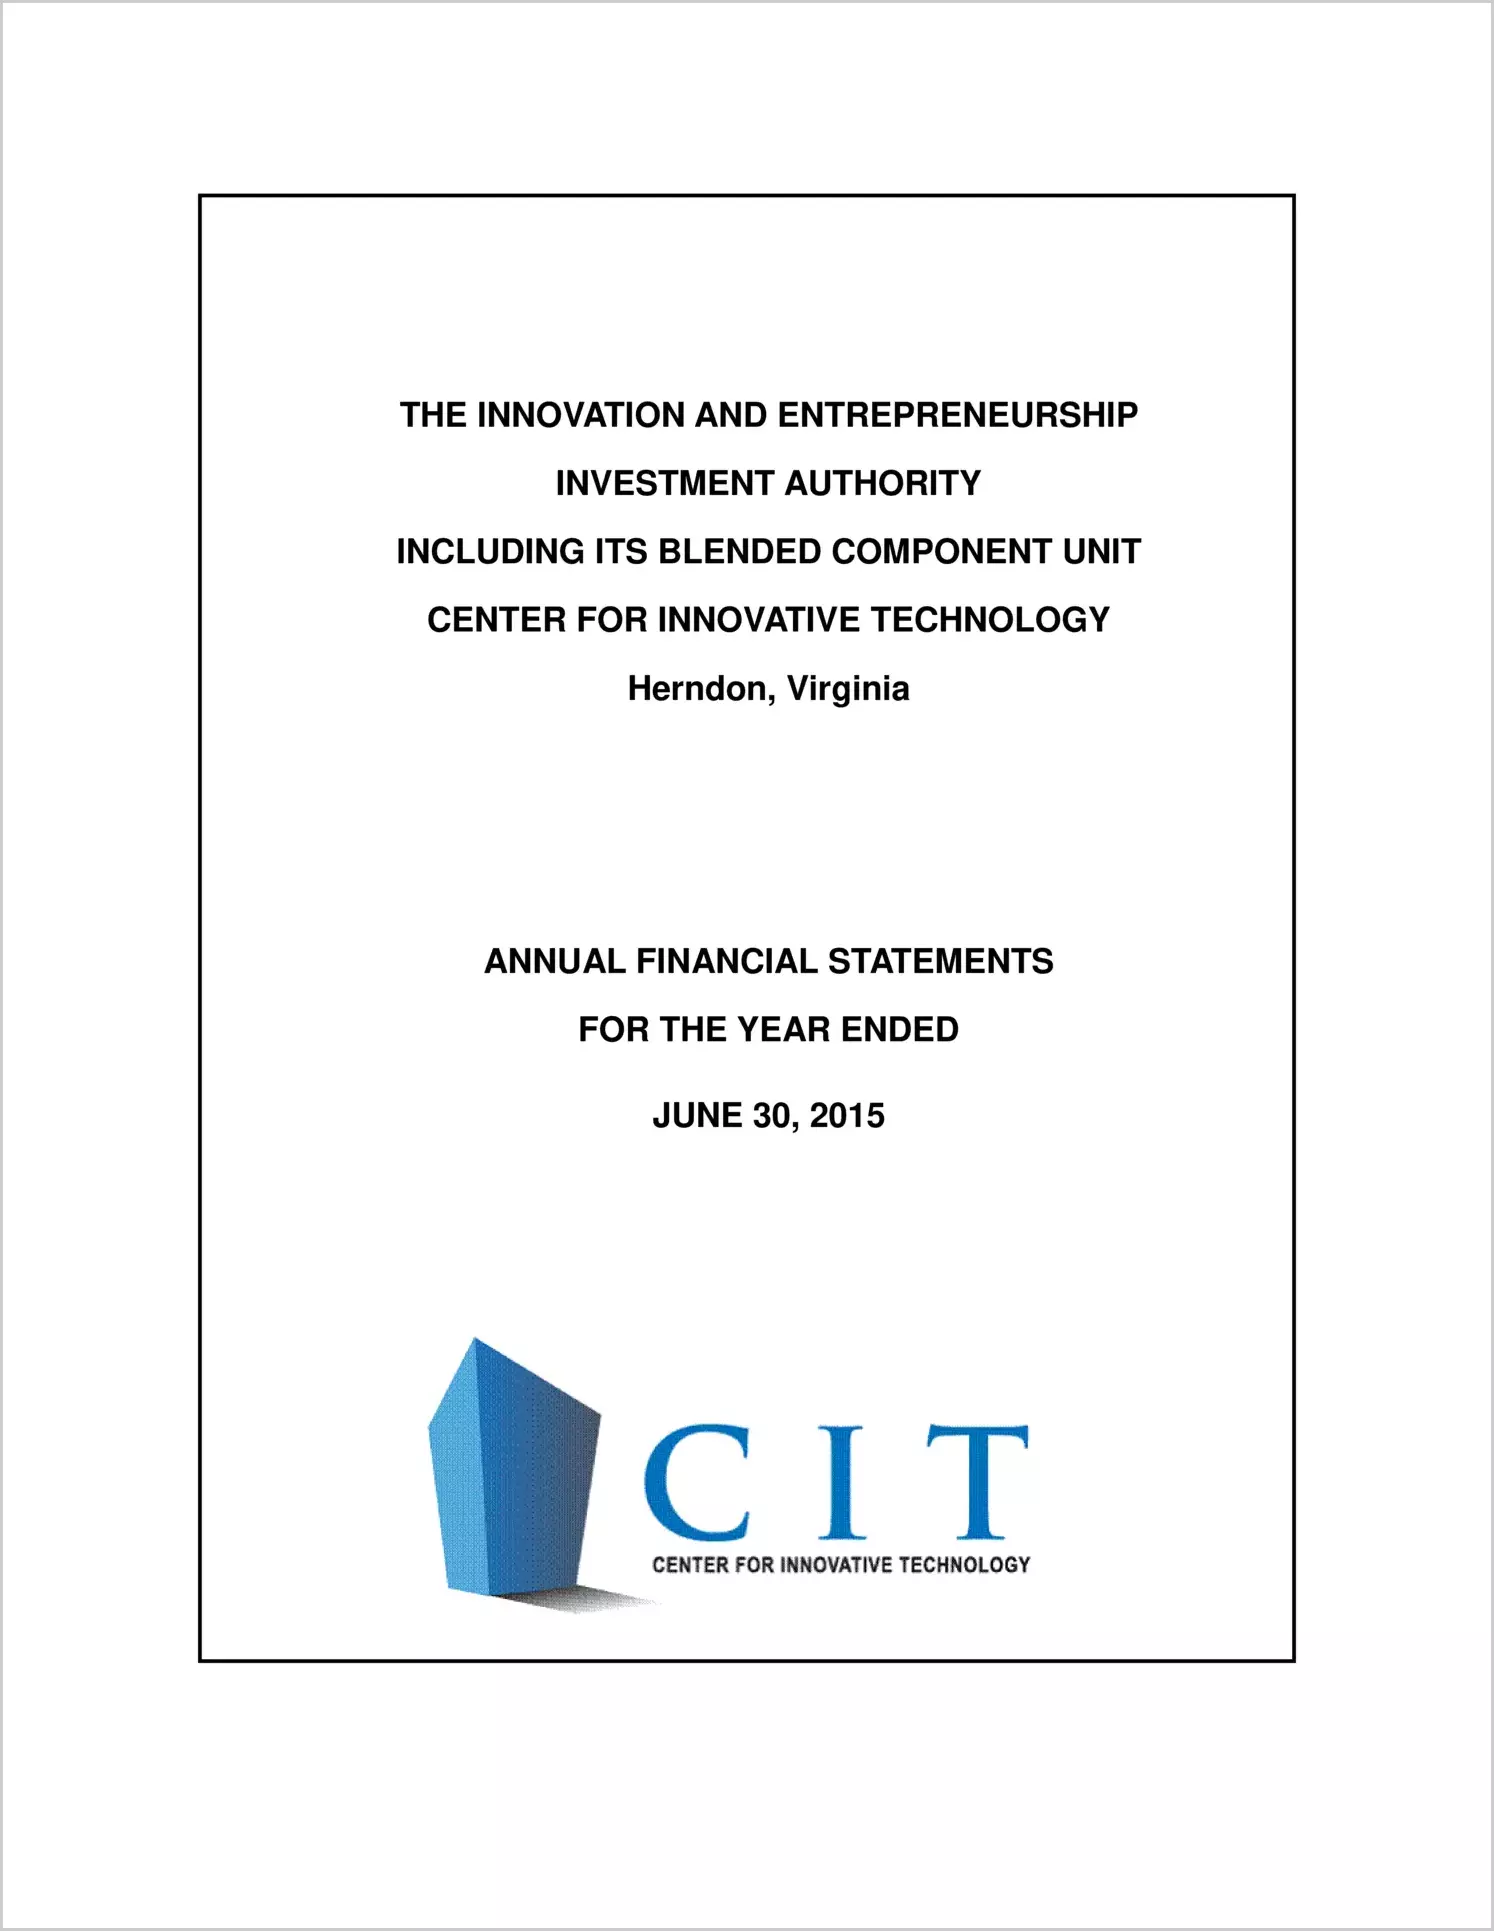 Innovation and Entrepreneurship Investment Authority Including Its Blended Component Unit Center for Innovative Technology  Financial Statement Report for the year ended June 30, 2015